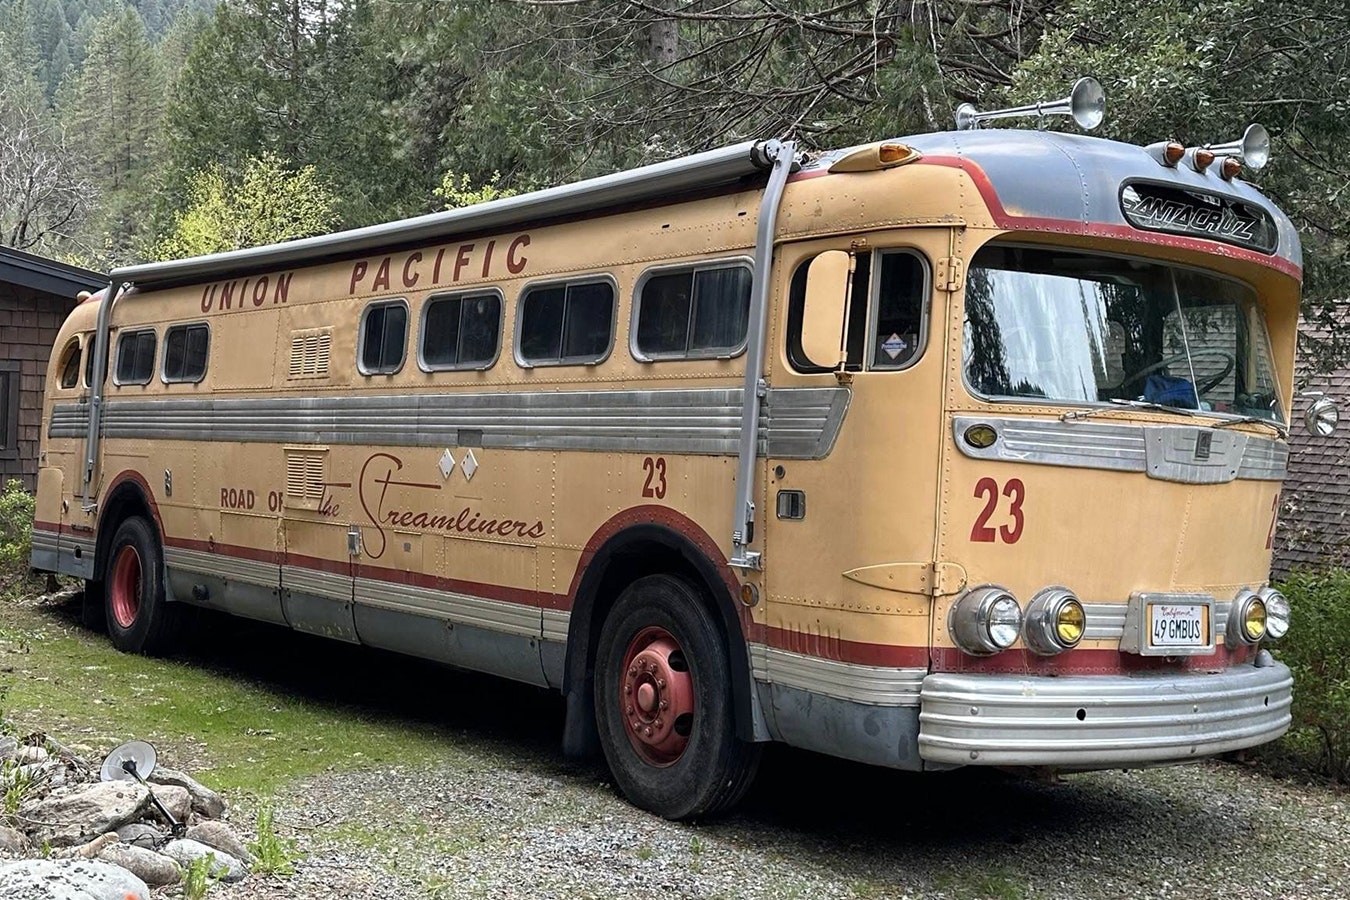 No. 23 is one of only two 1949 GMC Union Pacific passenger buses known to exist. It still has its original paint, logos and accessories, like the horns on the roof.